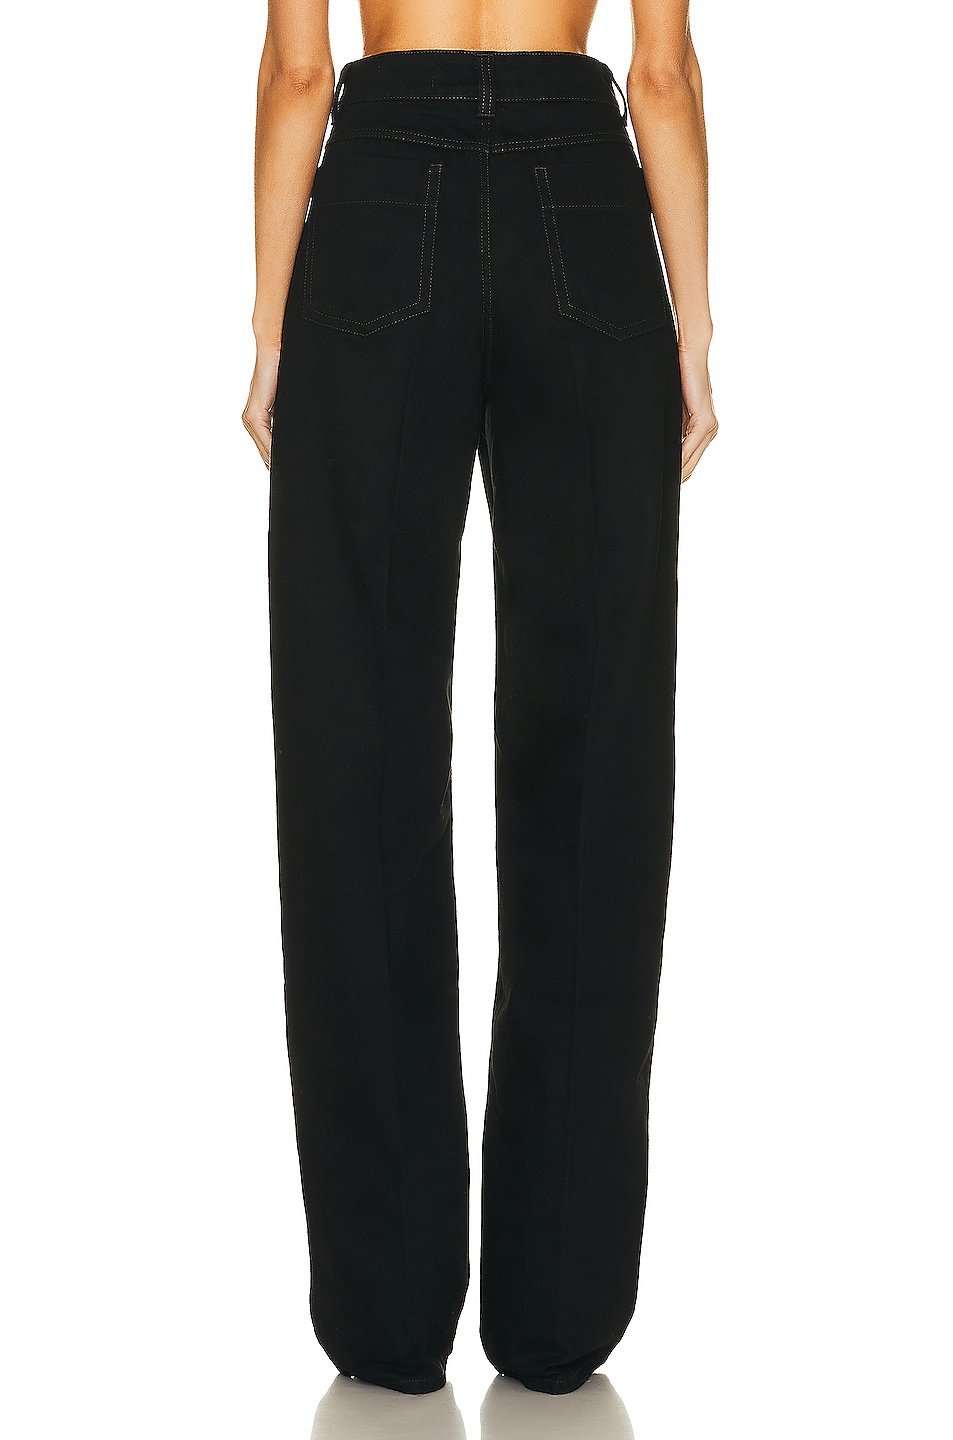 Lemaire Denim High Waisted Pant in Black | FWRD